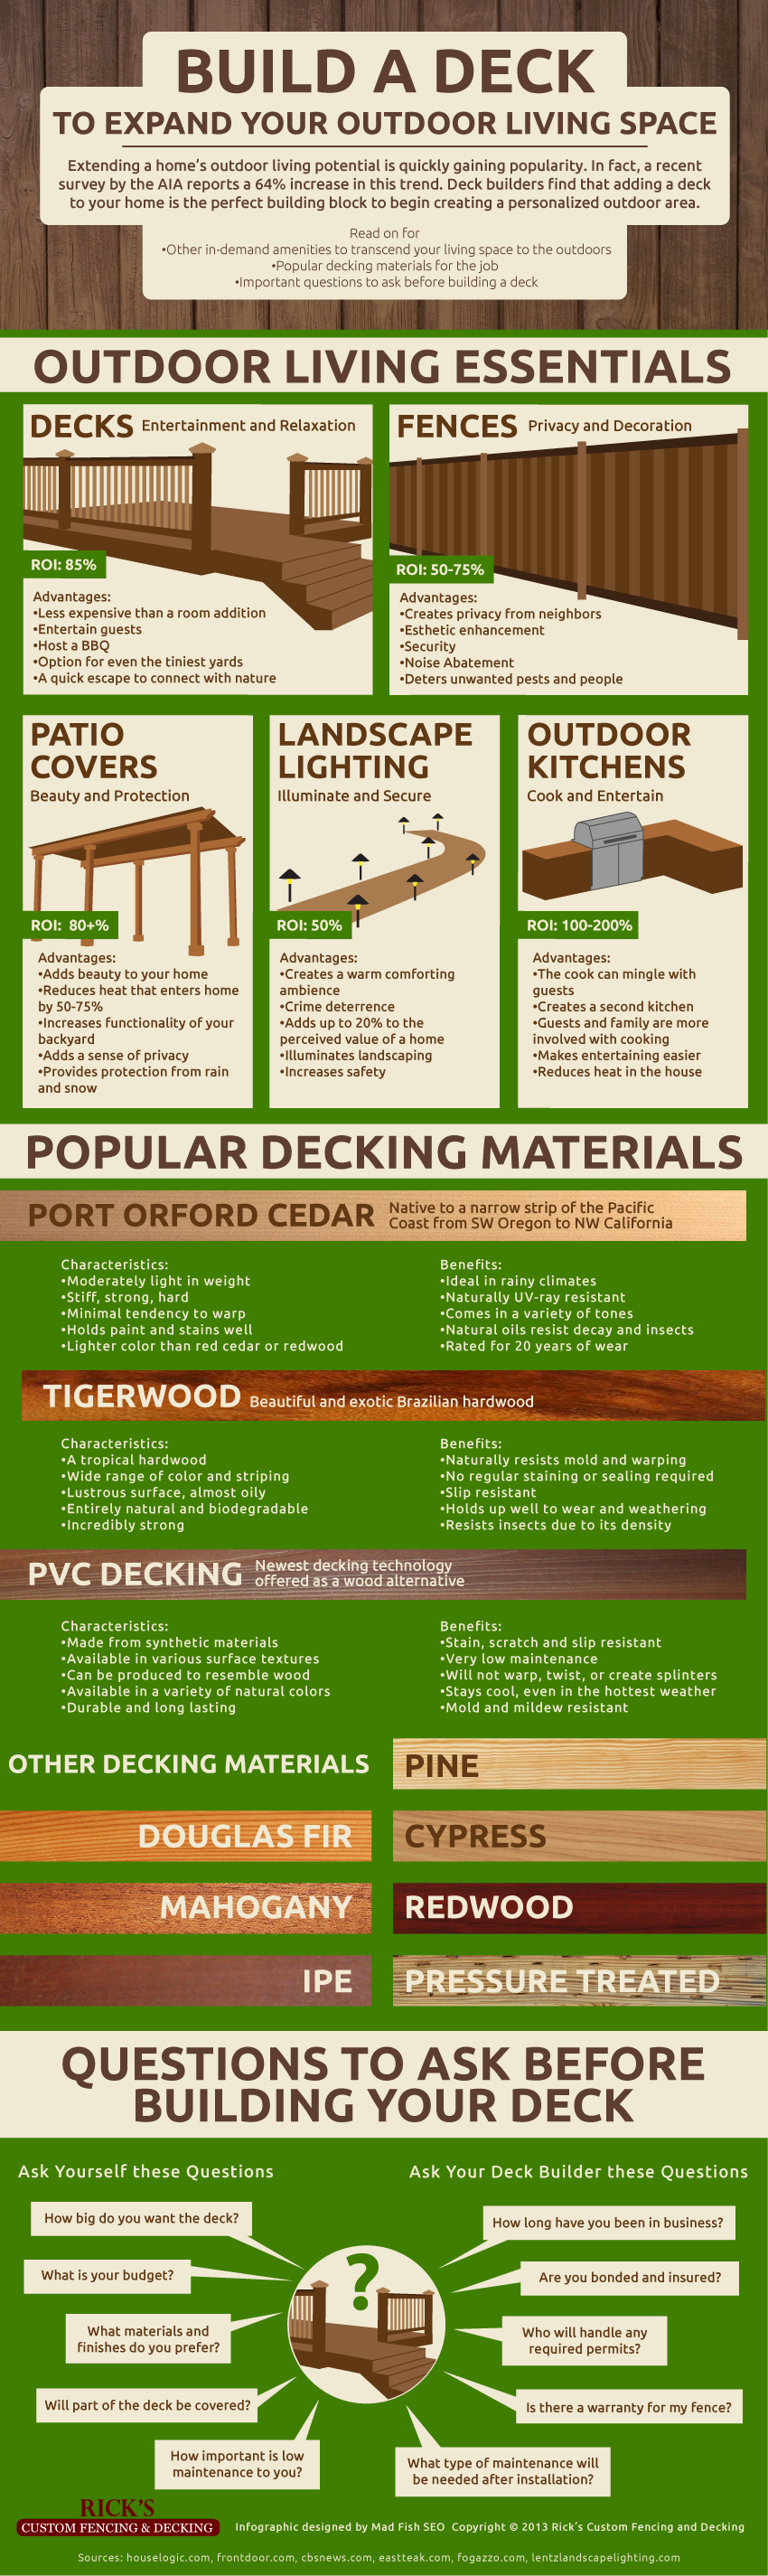 Build a Deck to Expand Your Outdoor Living Space